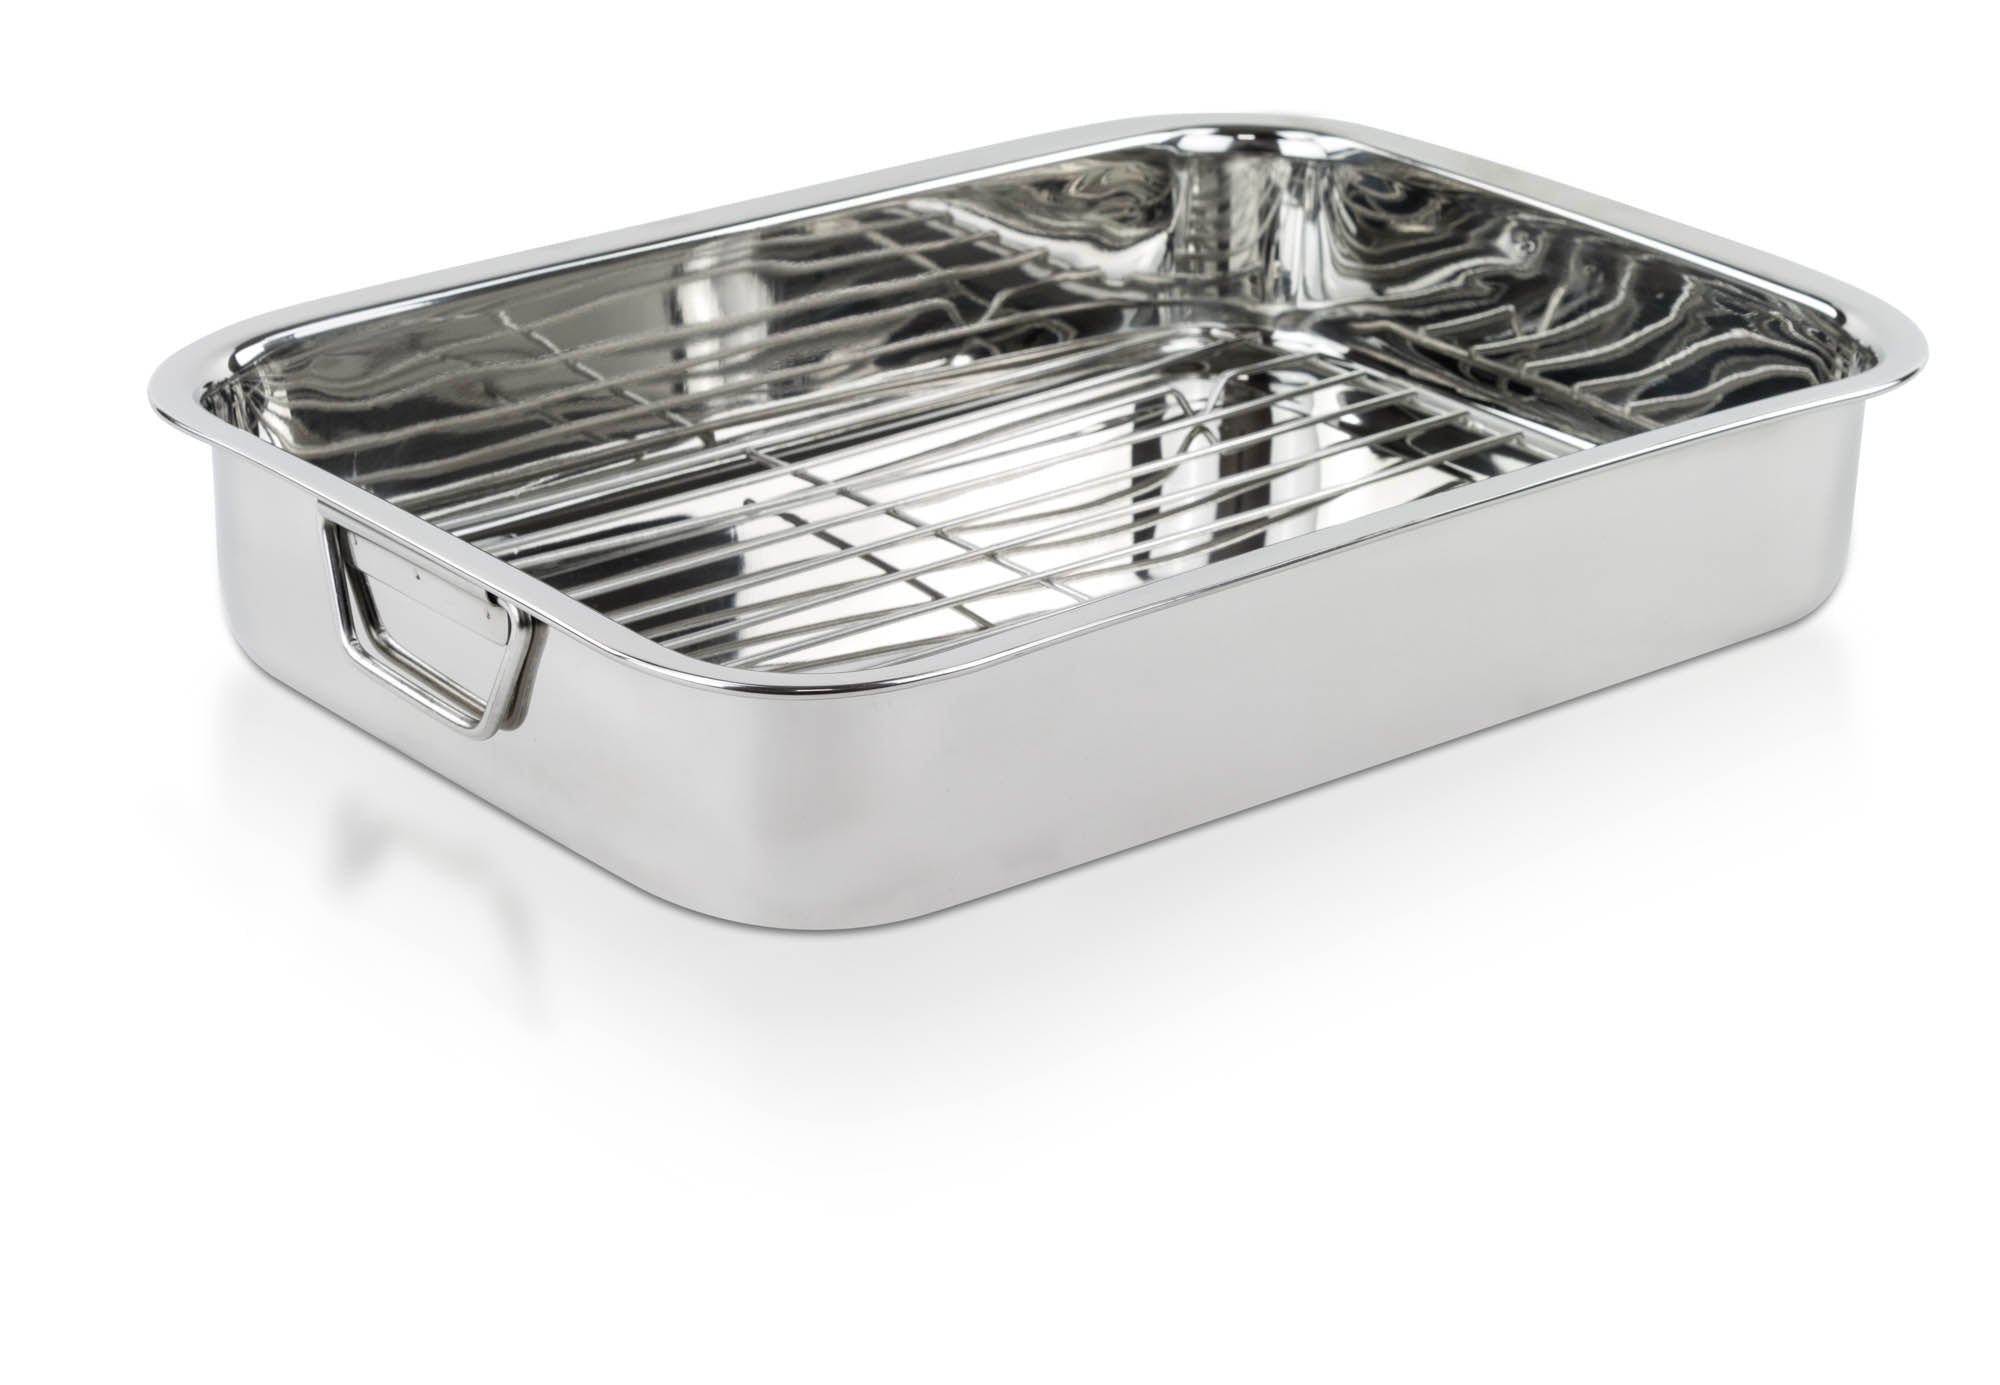 10 Quart Stainless Steel Oval Roaster Set with Wire Rack and High